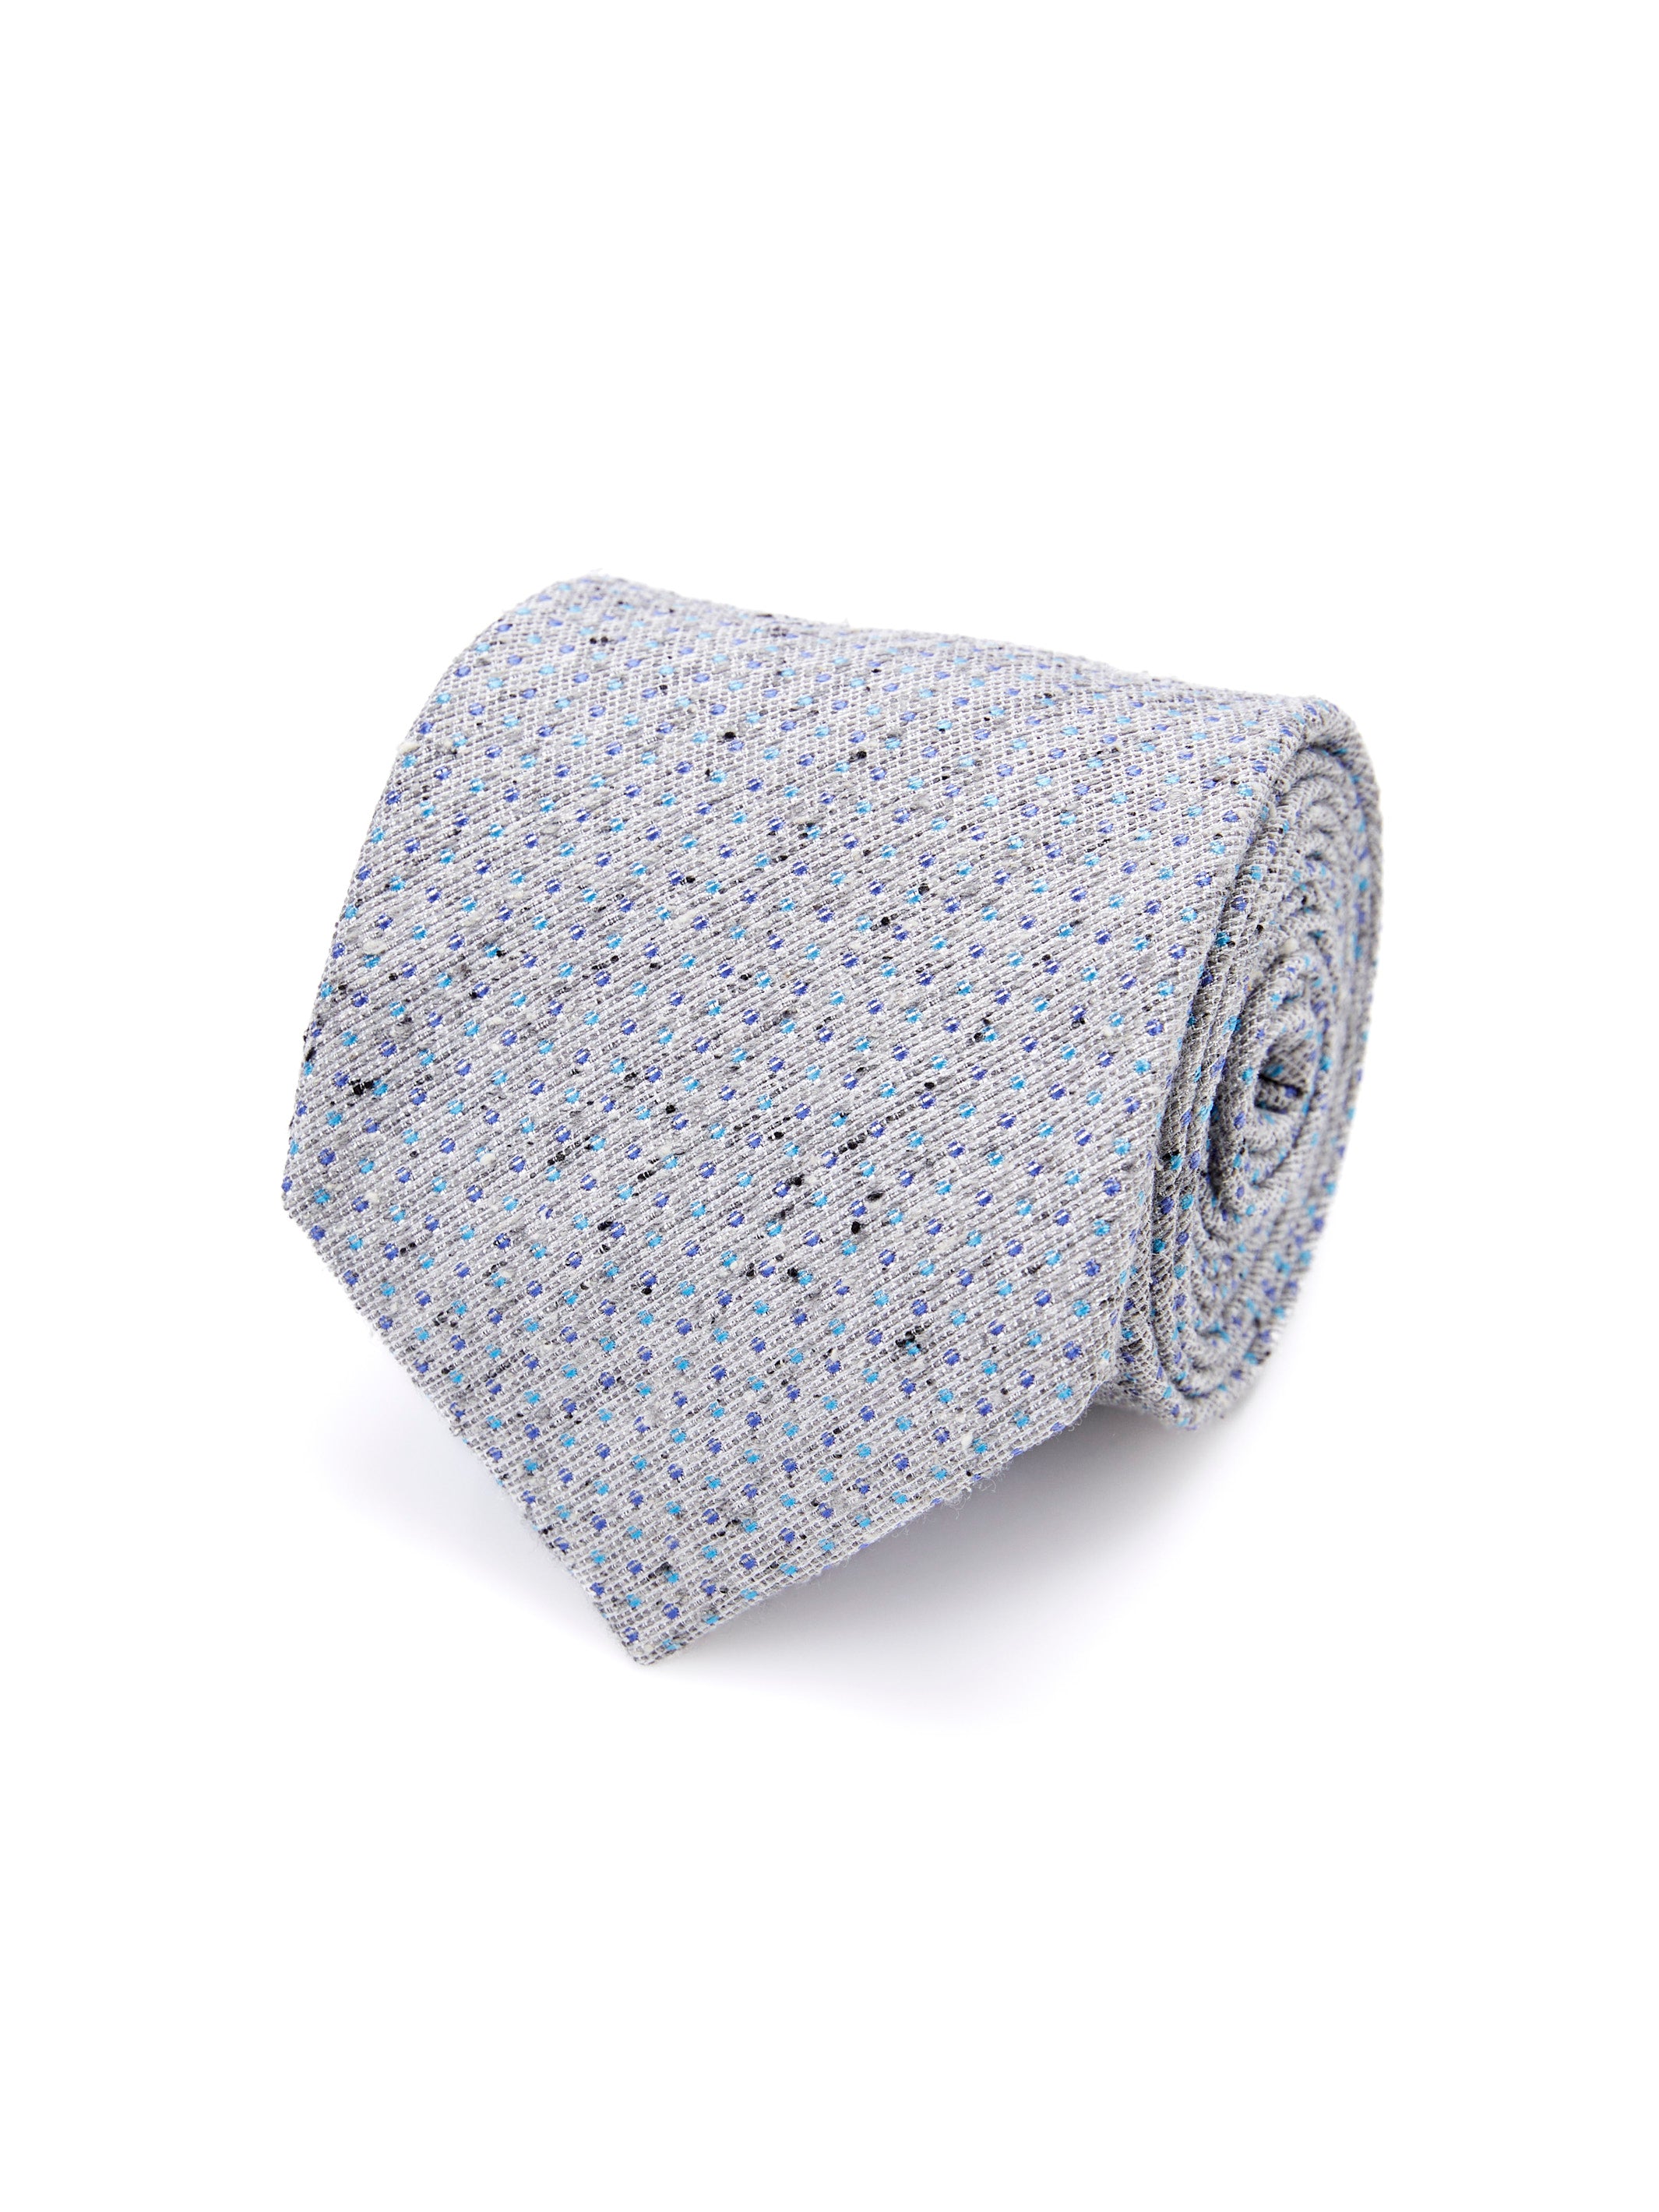 Light gray tie with polka dots